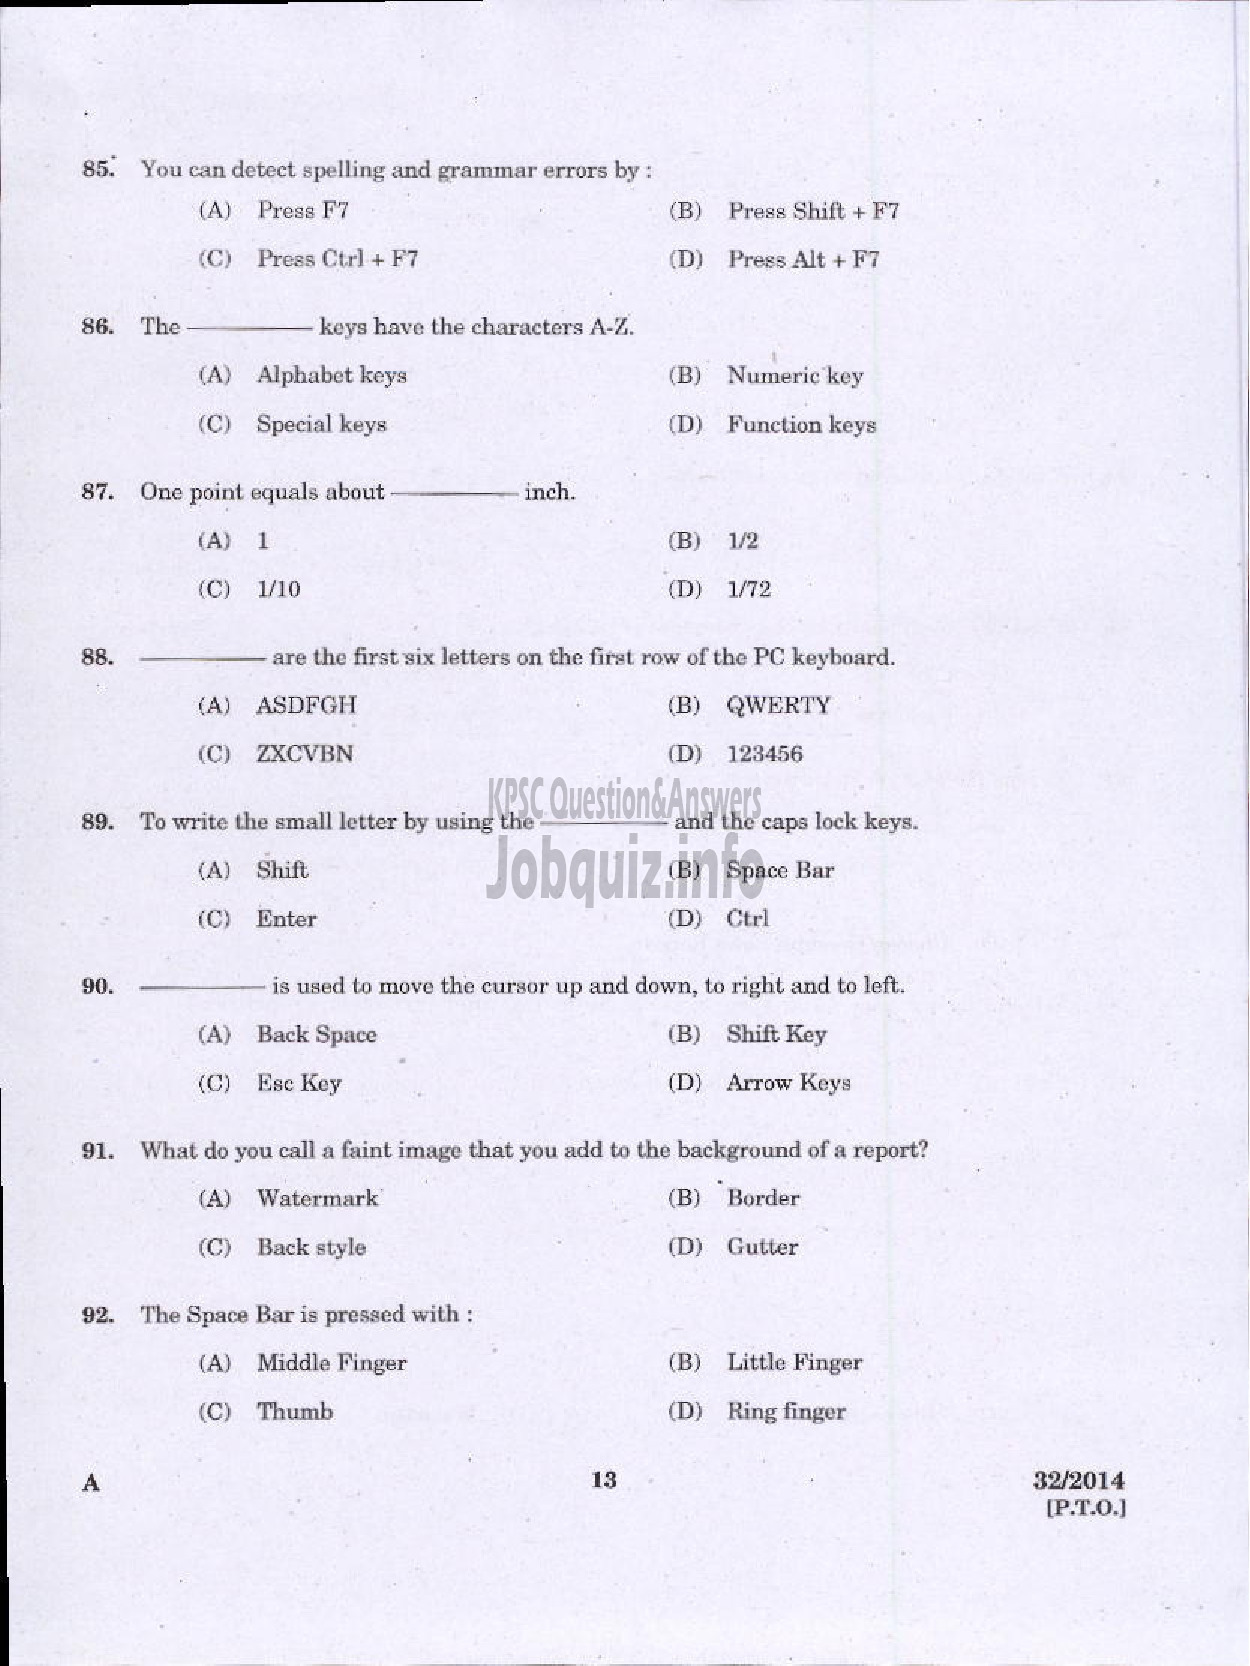 Kerala PSC Question Paper - LOWER DIVISION TYPIST NCA VARIOUS GOVERNMENT OWNED COMPANIES IDKY-11